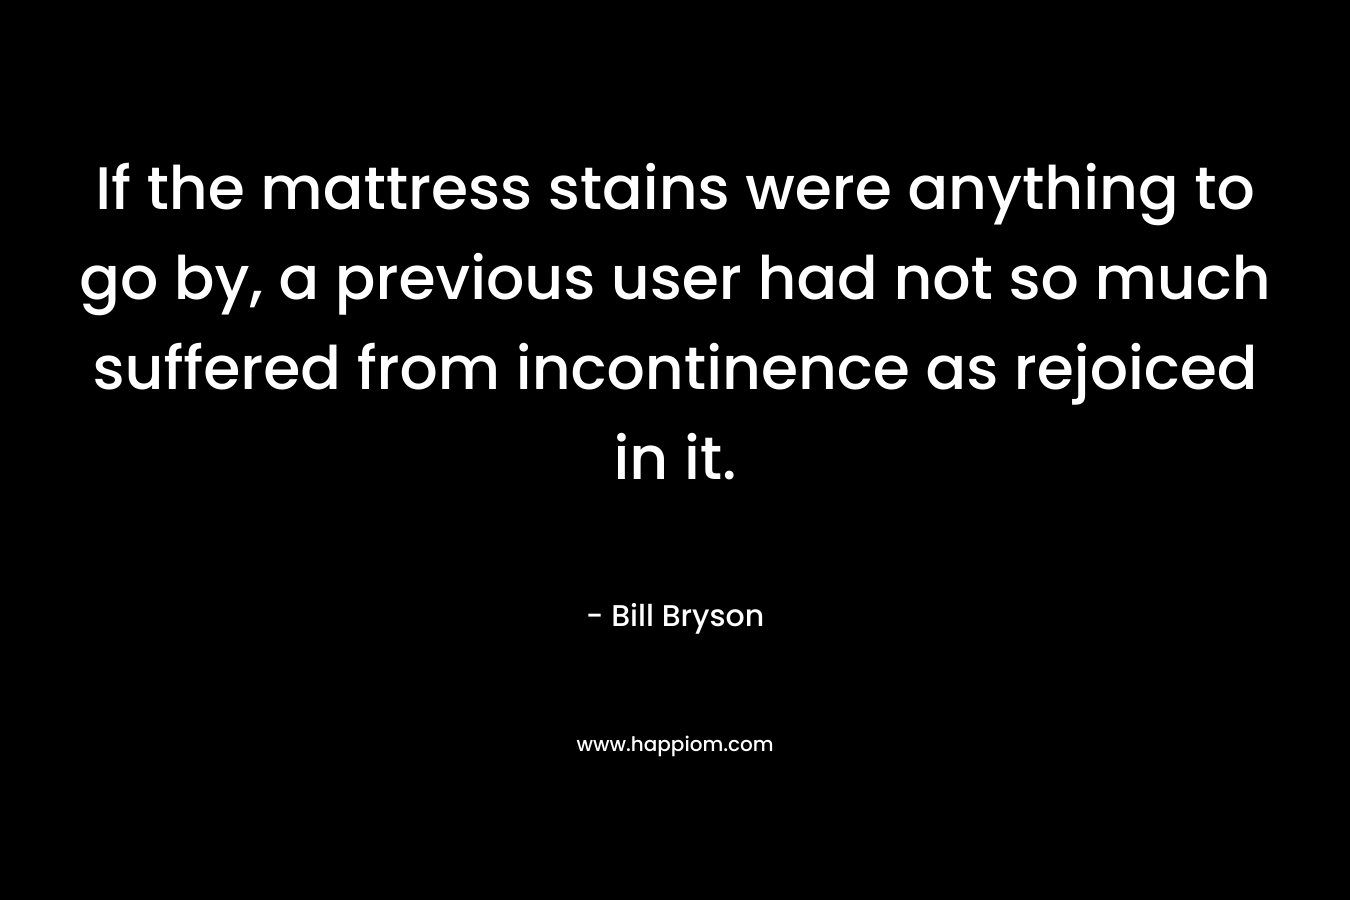 If the mattress stains were anything to go by, a previous user had not so much suffered from incontinence as rejoiced in it. – Bill Bryson